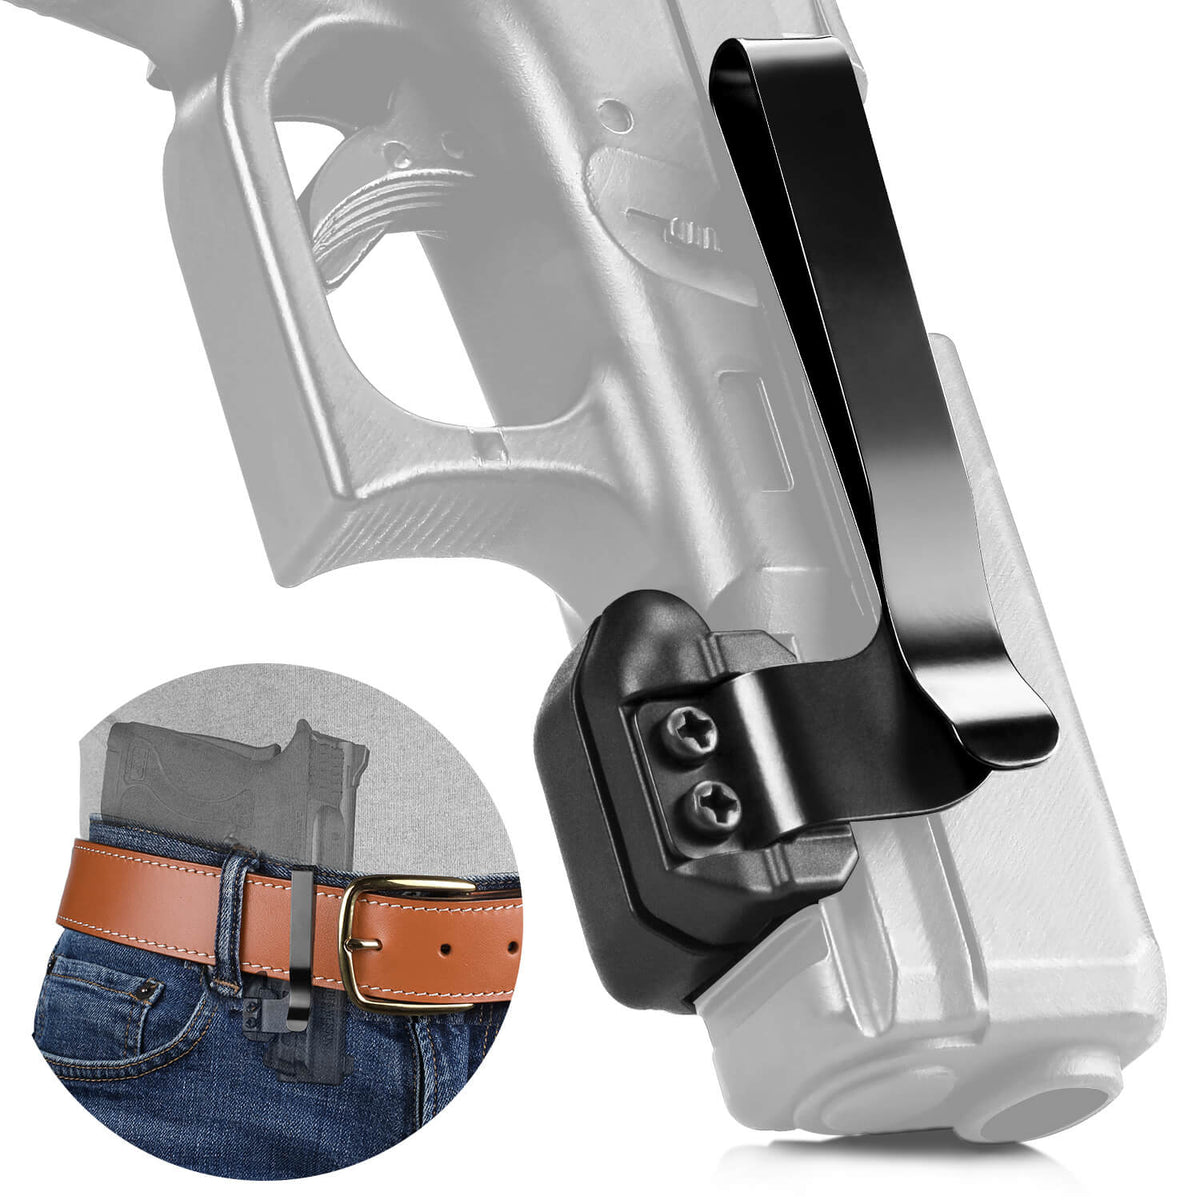 Universal Rail Gun Clip Low Profile Concealed Carry Fit for Gun w/ Rail 3.1 Inch | WARRIORLAND